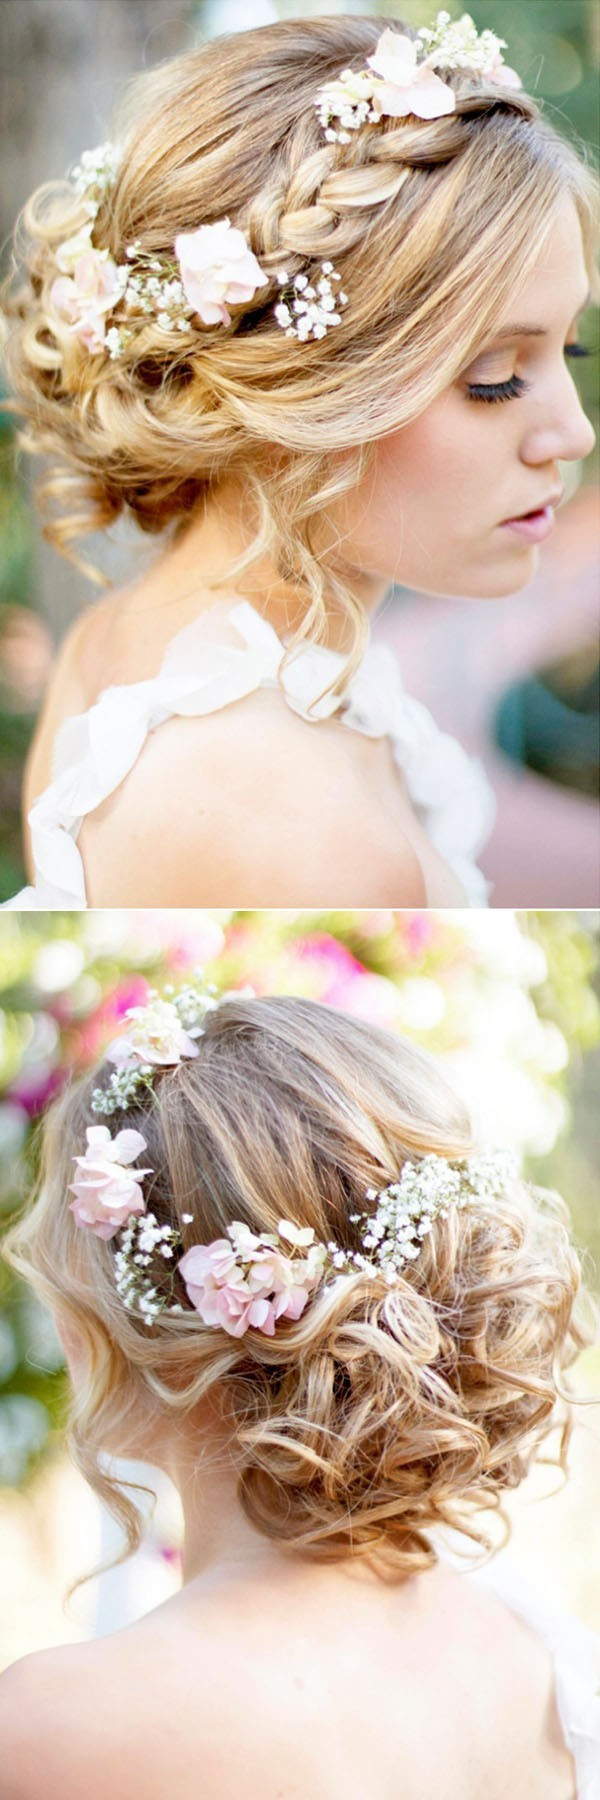 Prom Hairstyles With Flowers
 18 Trending Wedding Hairstyles with Flowers Oh Best Day Ever